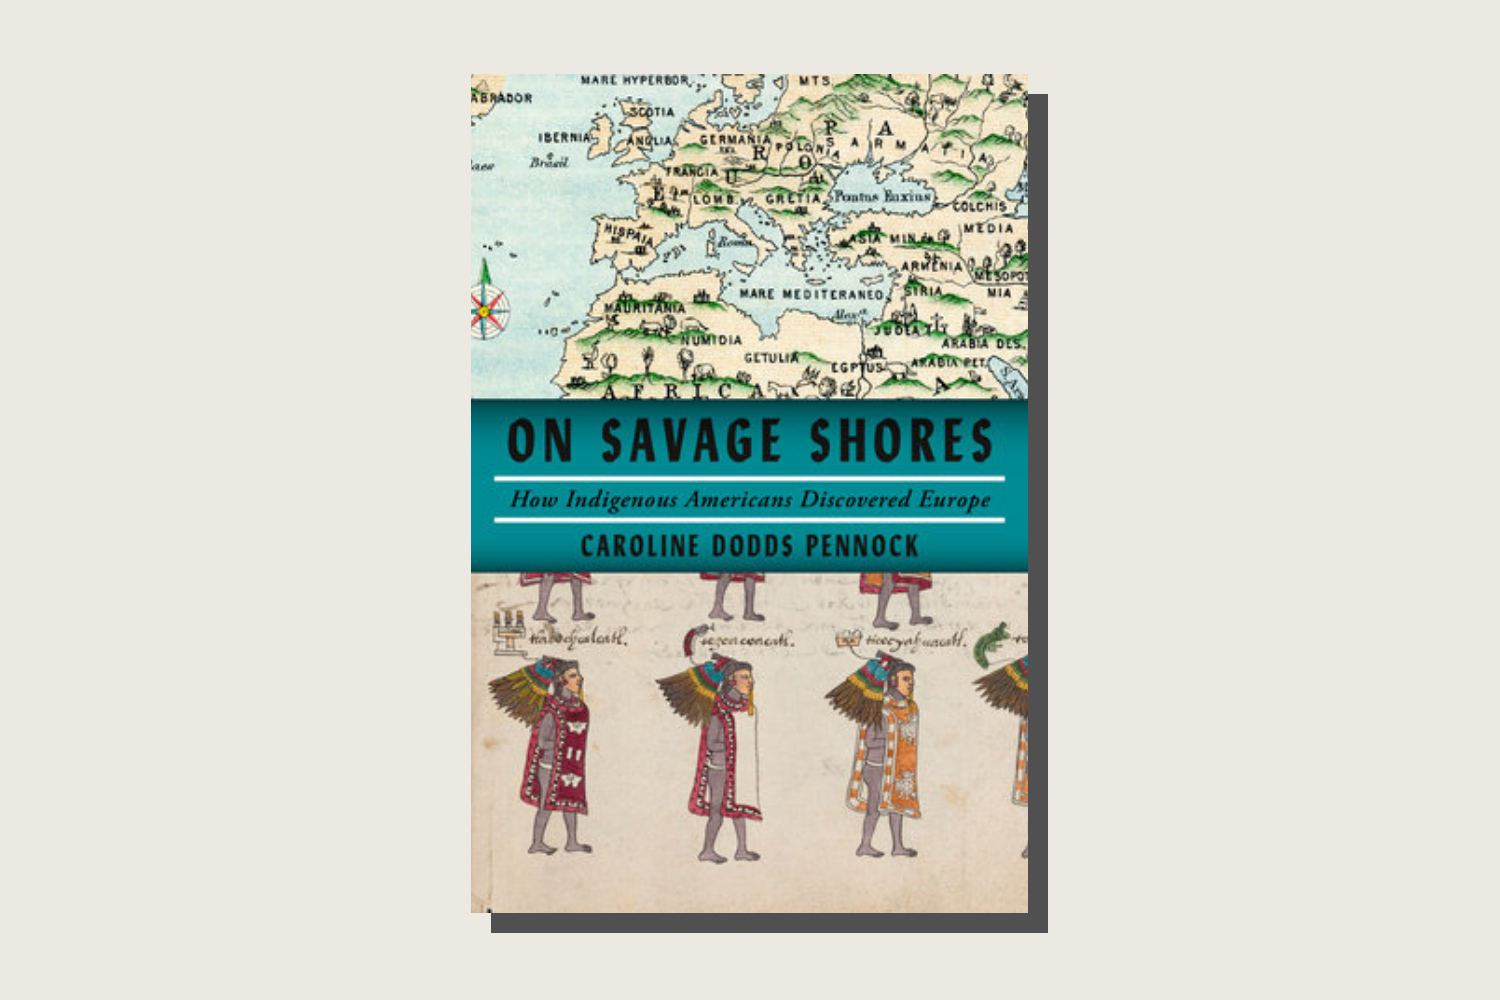 On Savage Shores: How Native Americans Discovered Europe, Caroline Dodds Pennock, Knopf, 320 pp., .50, January 2023